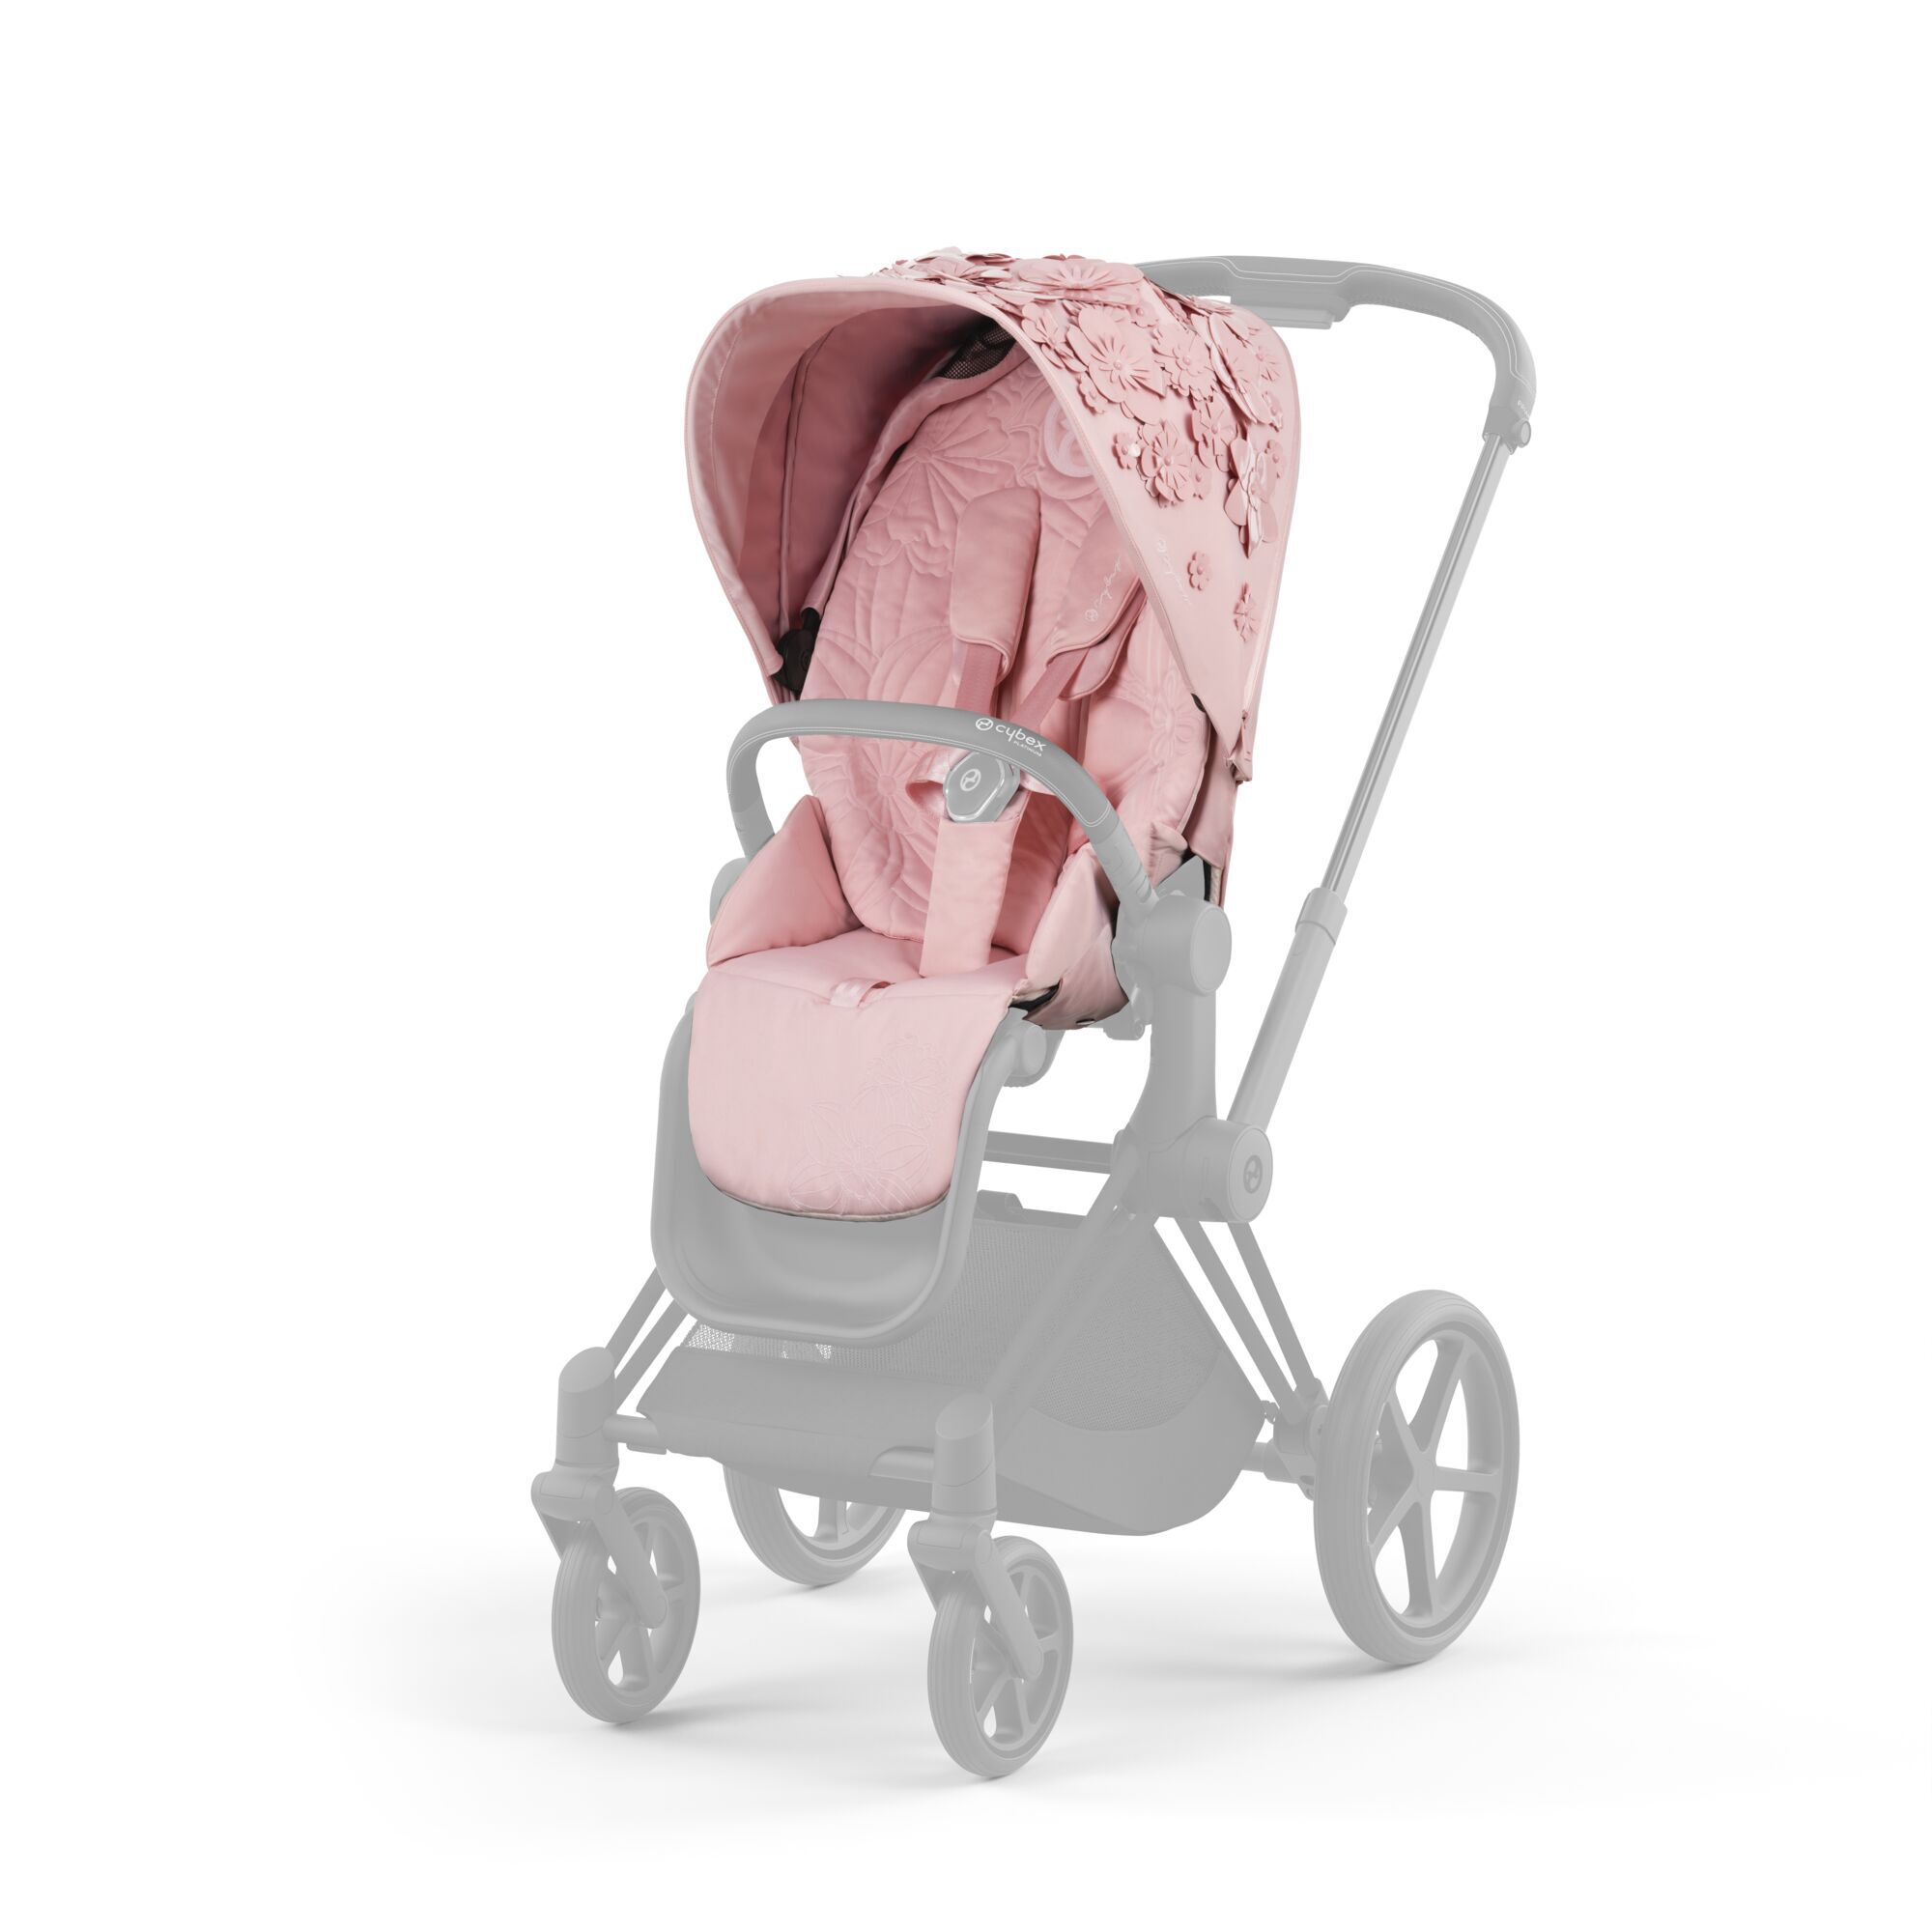 Reversible Seat Liners for Silver Cross Pioneer Pushchairs Pink Designs 